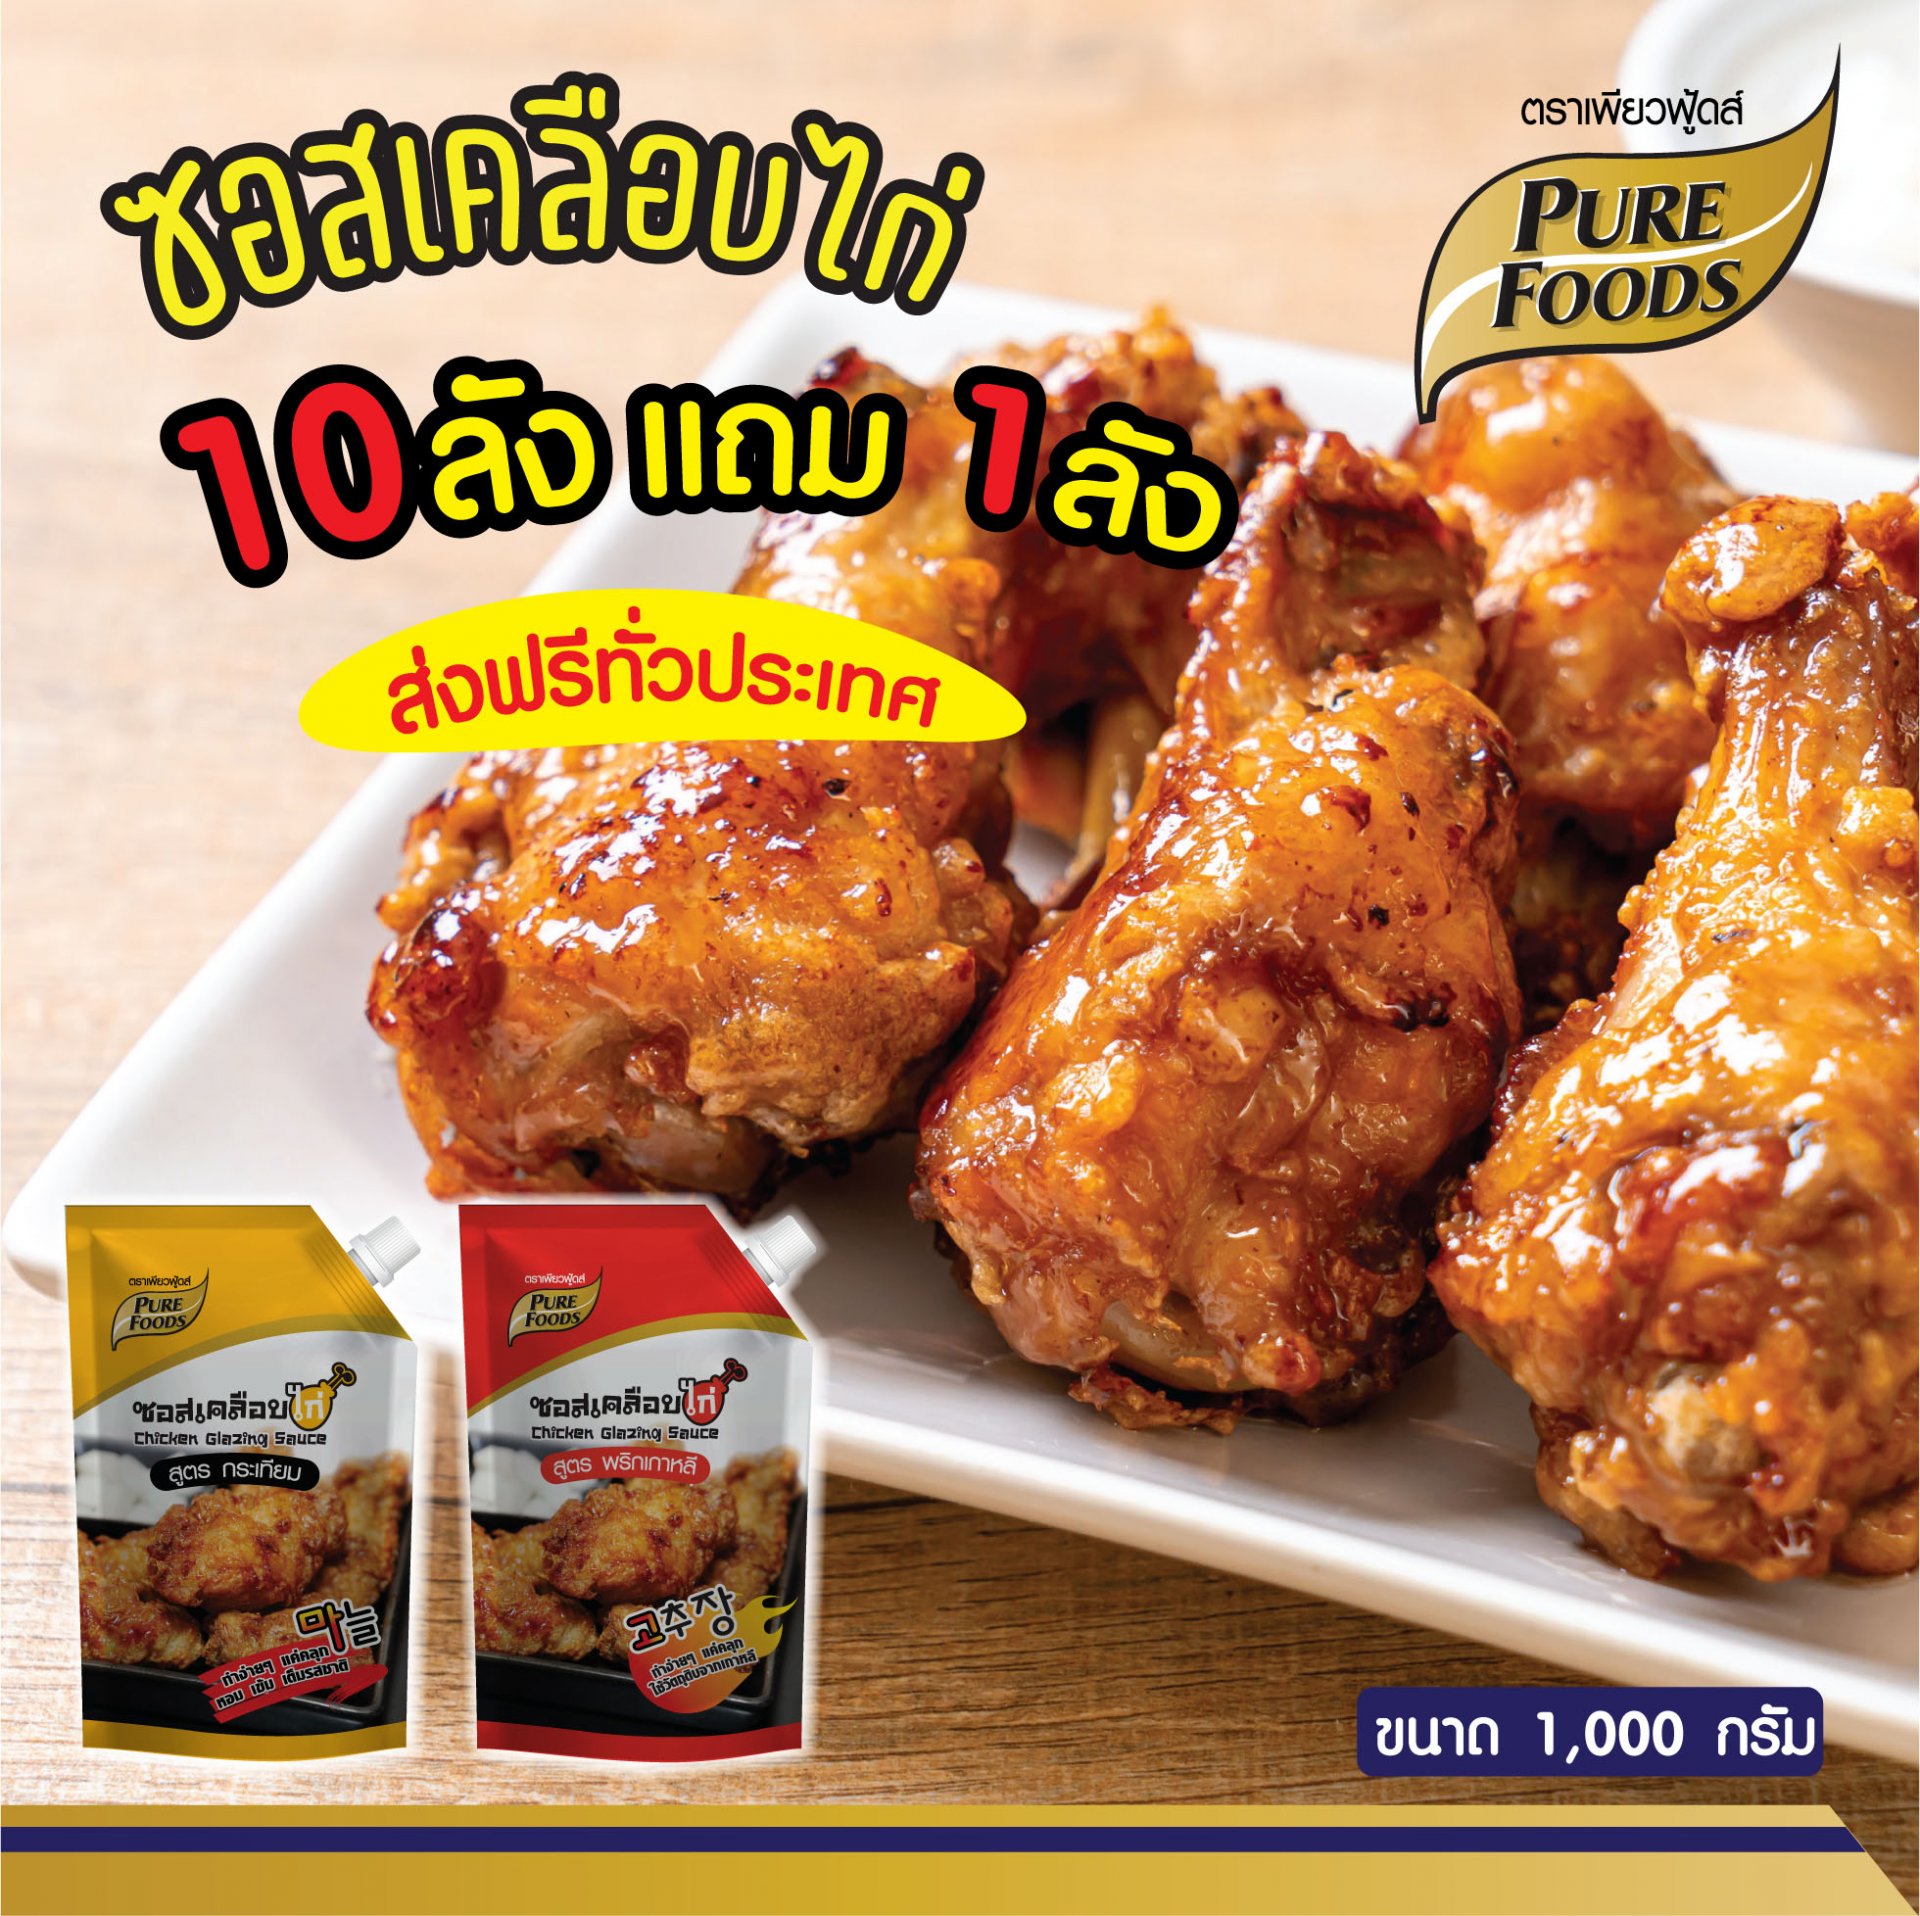 Chicken Glazing Sauce 1000 g. (Buy 10 Get 1 Free and Free Delivery in Thailand)